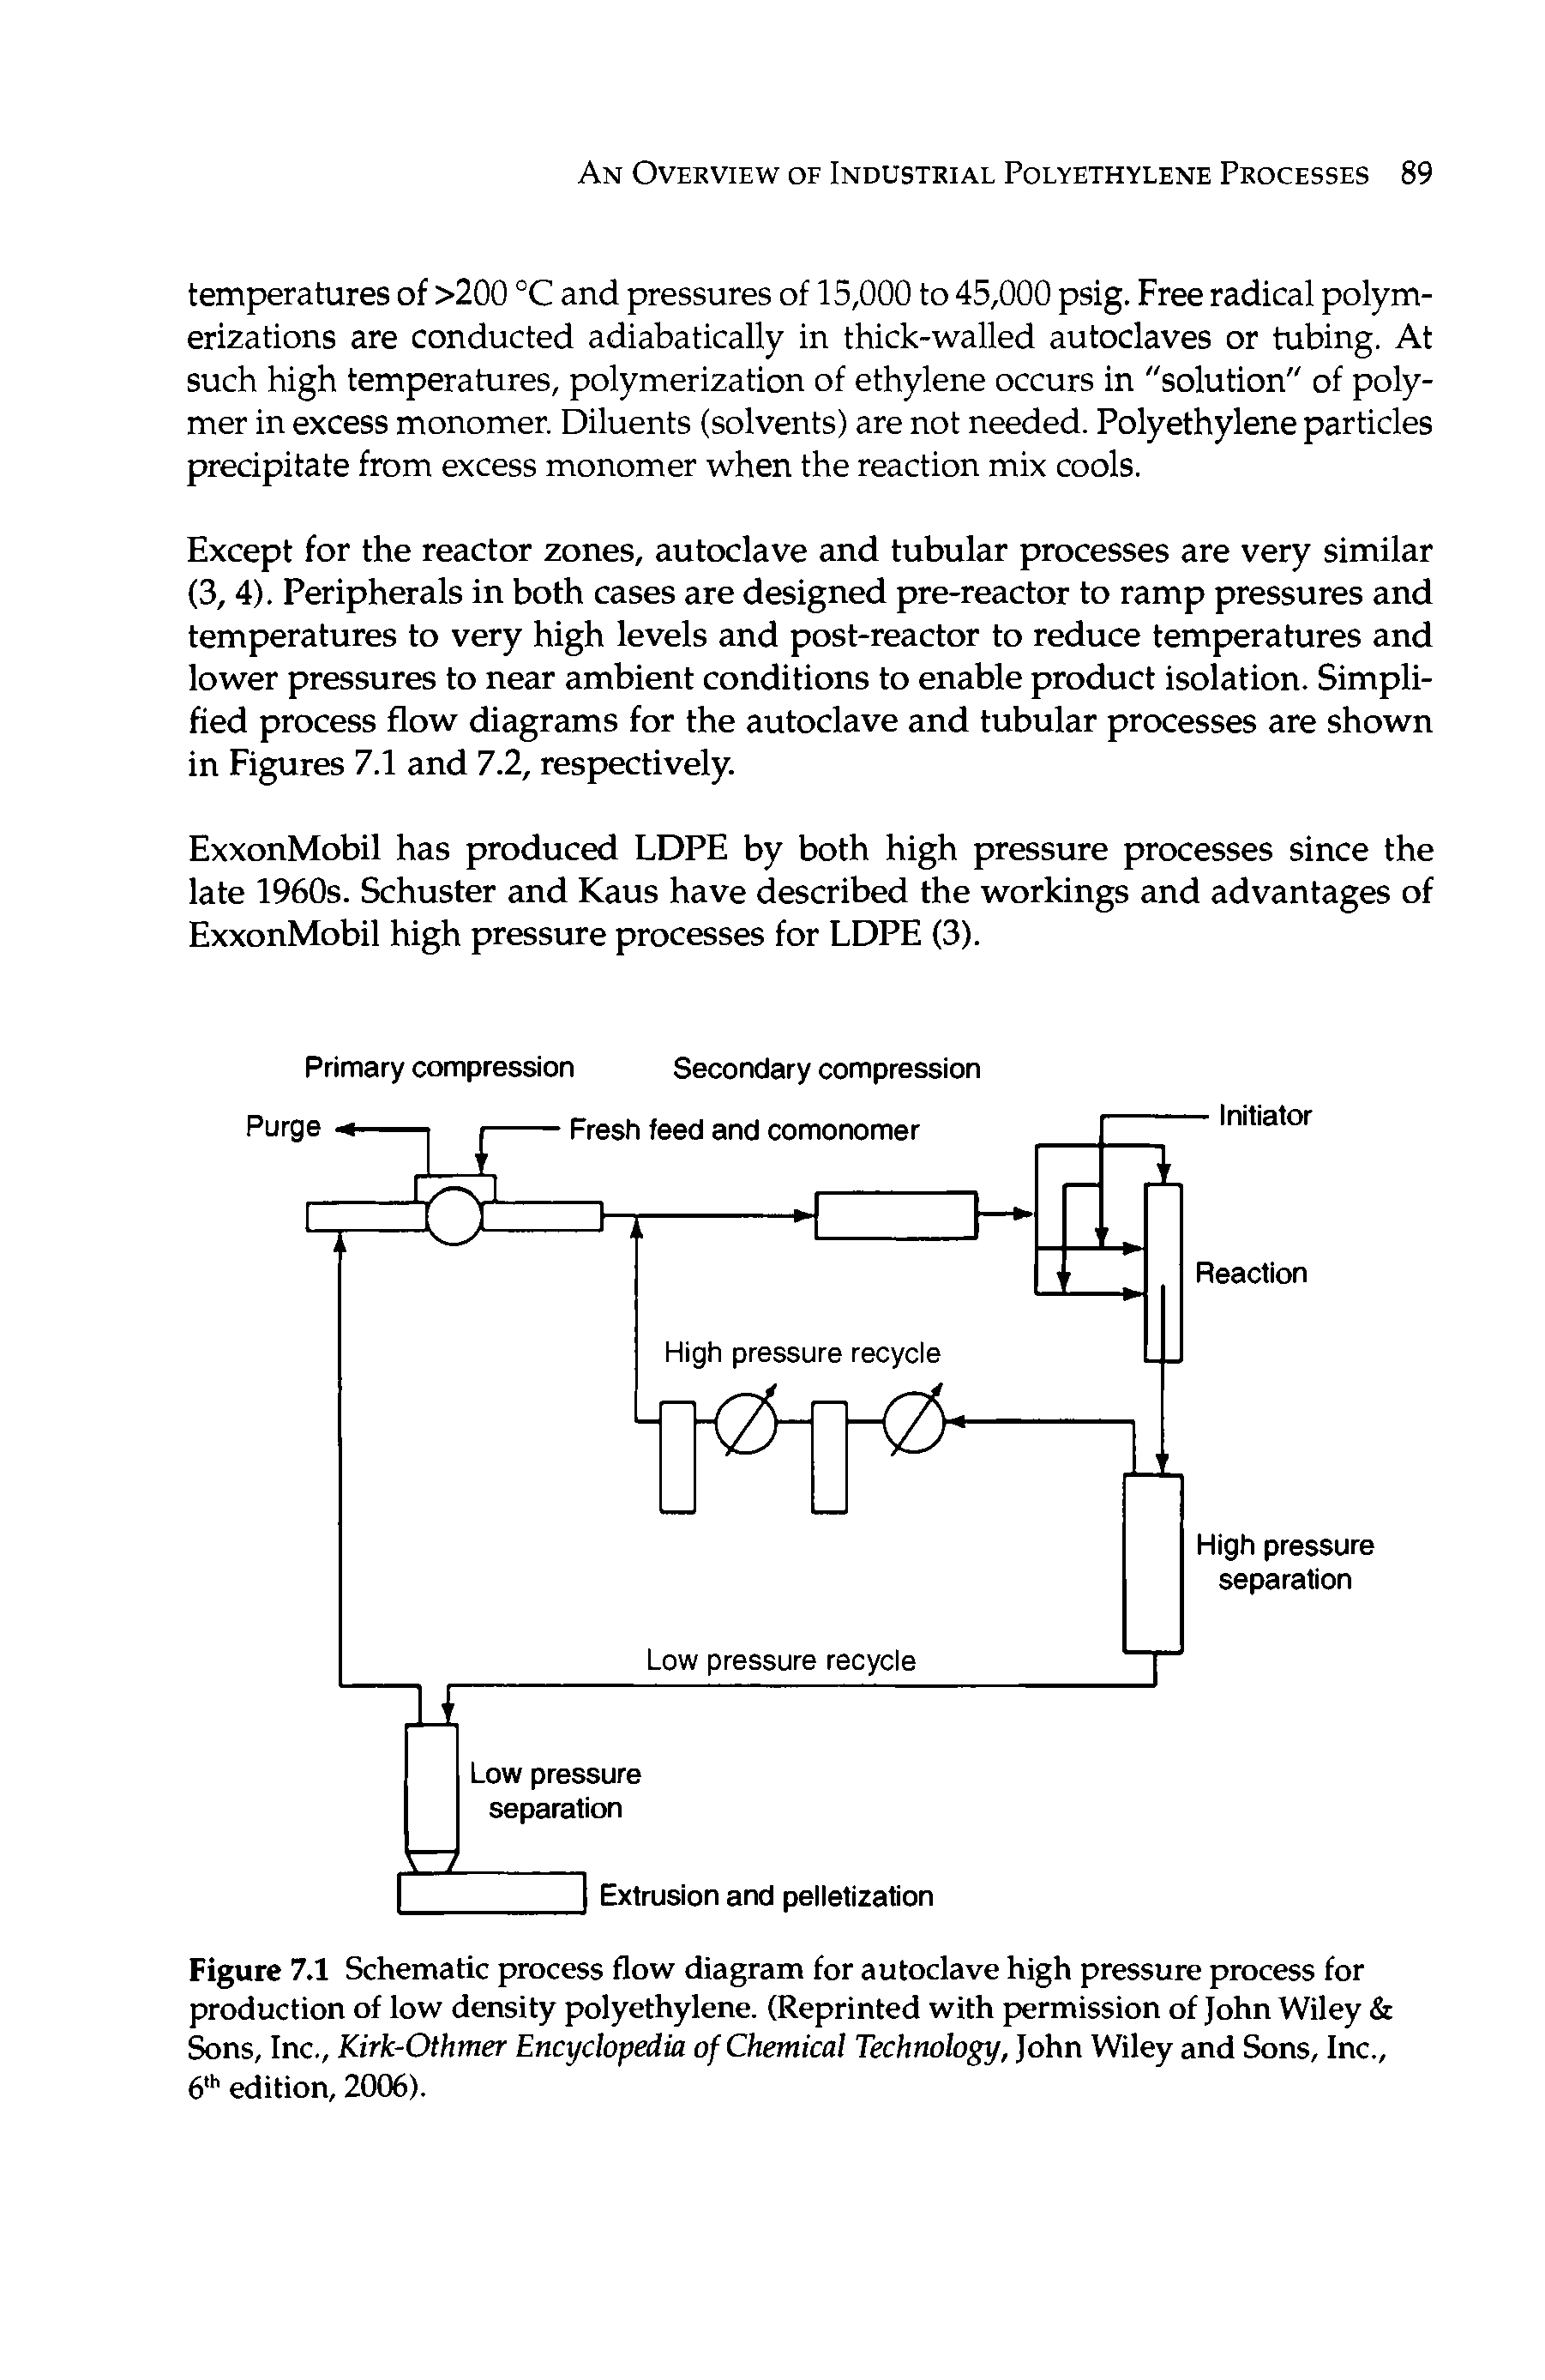 Figure 7.1 Schematic process flow diagram for autoclave high pressure process for production of low density polyethylene. (Reprinted with permission of John Wiley Sons, Inc., Kirk-Othmer Encyclopedia of Chemical Technology, John Wiley and Sons, Inc., h edition, 2006).